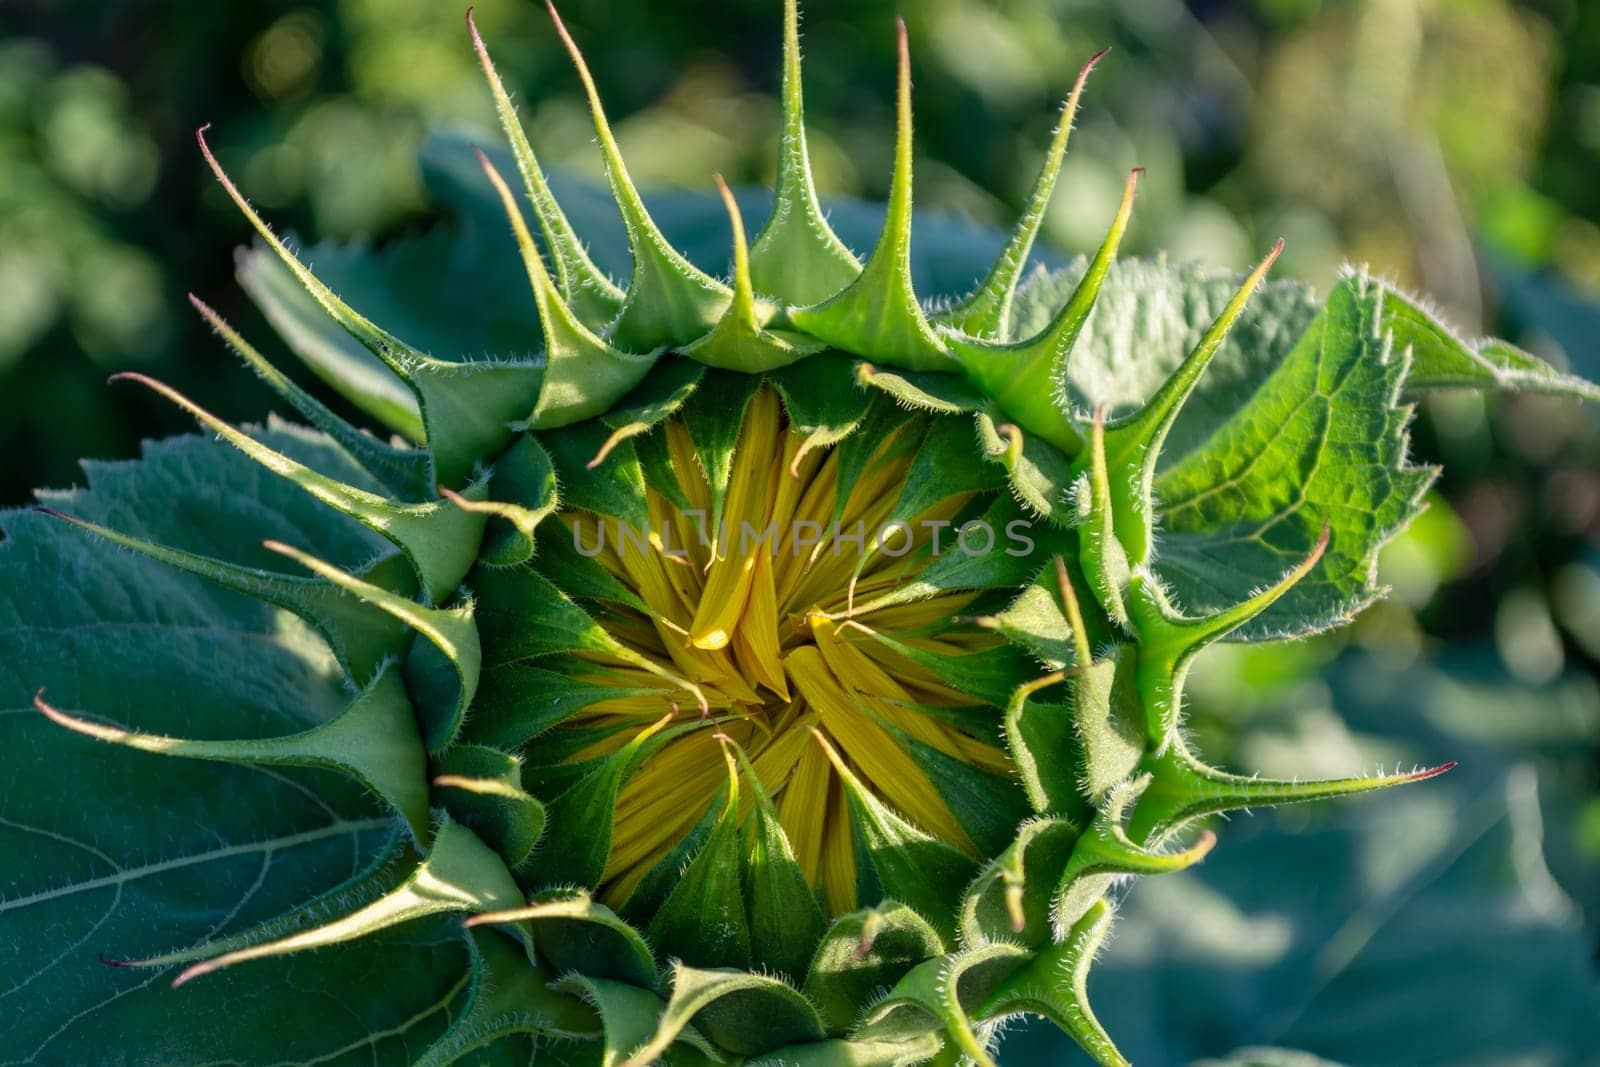 Close-up of a closed sunflower bud head with green leaves and a yellow core. Agriculture theme. Botany